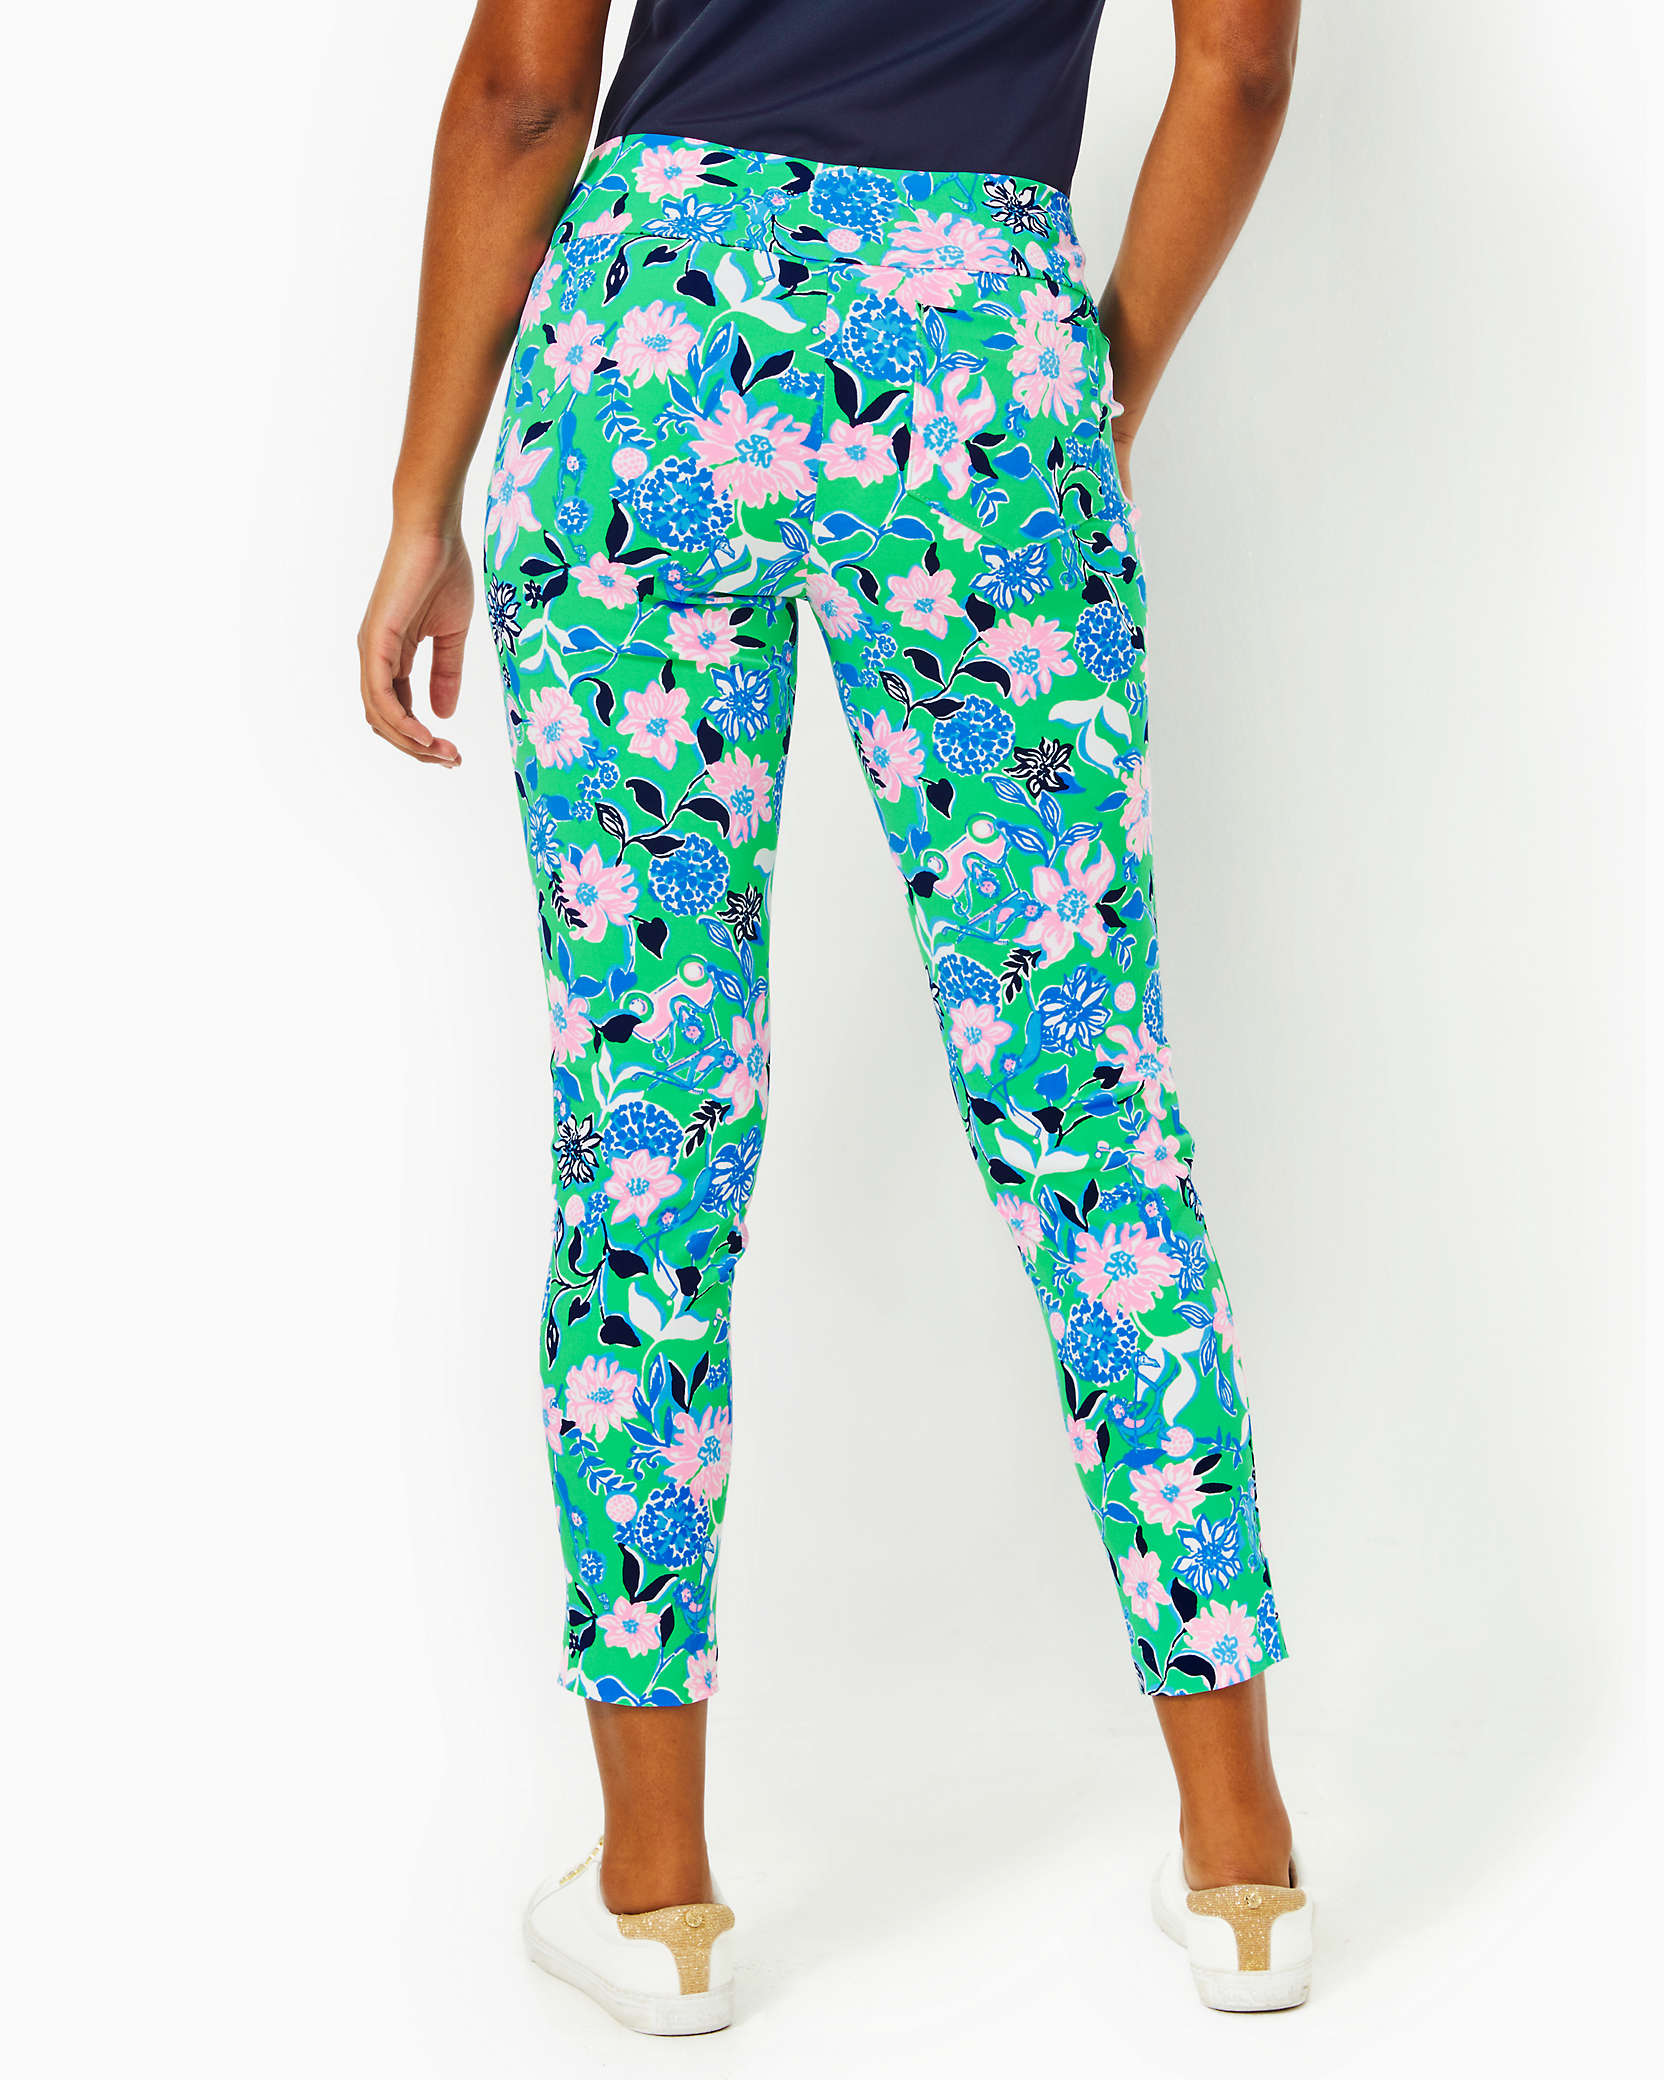 Shop Lilly Pulitzer Upf 50+ Luxletic 28" Corso Pant In Spearmint Golf Till You Drop Woven